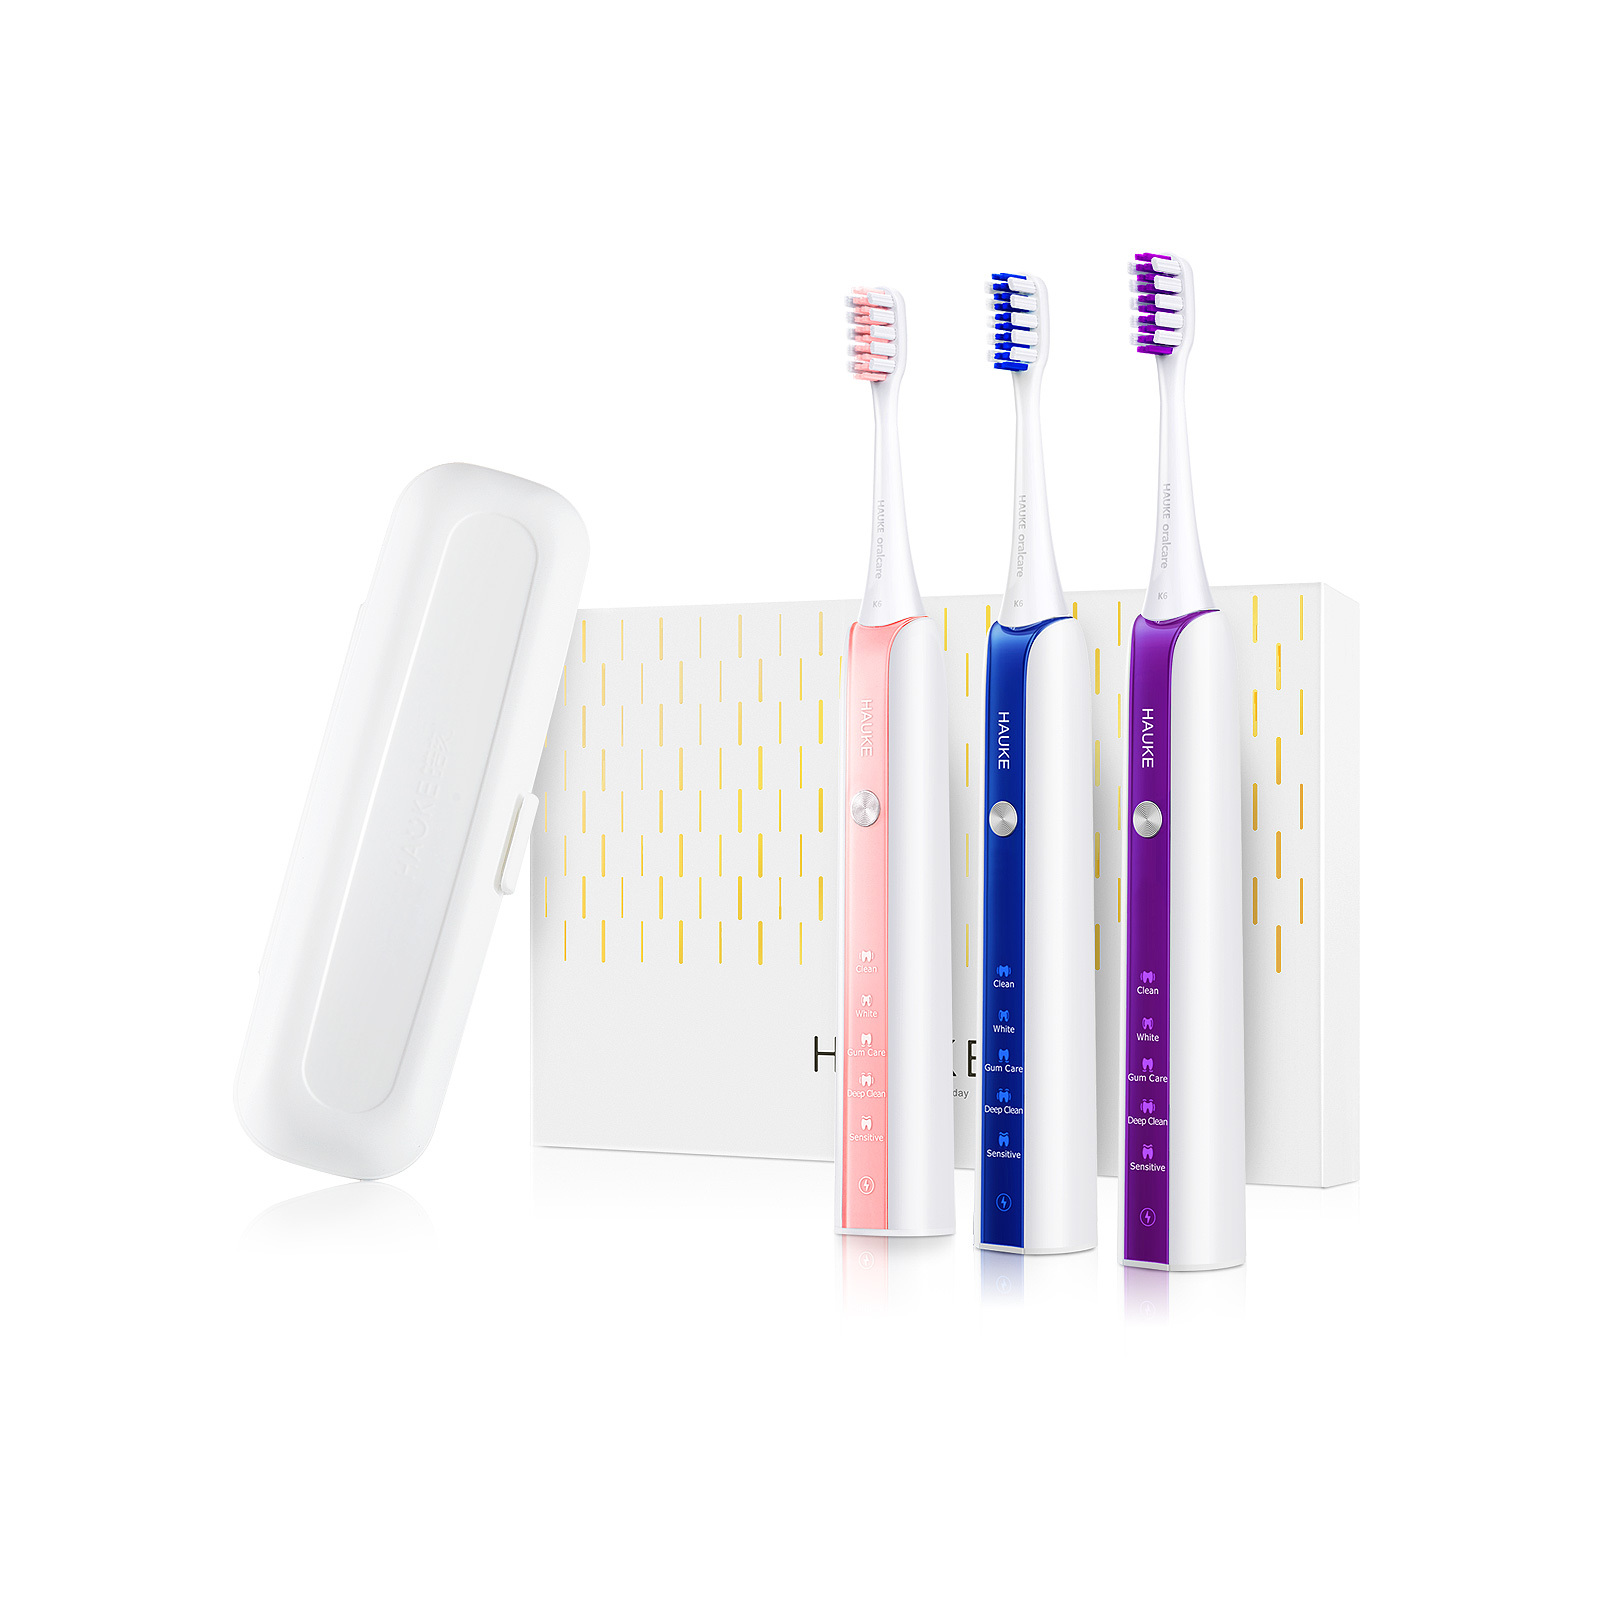 Electric toothbrush, sonicare toothbrush for adults, rechargeable electric toothbrush pink blue purple